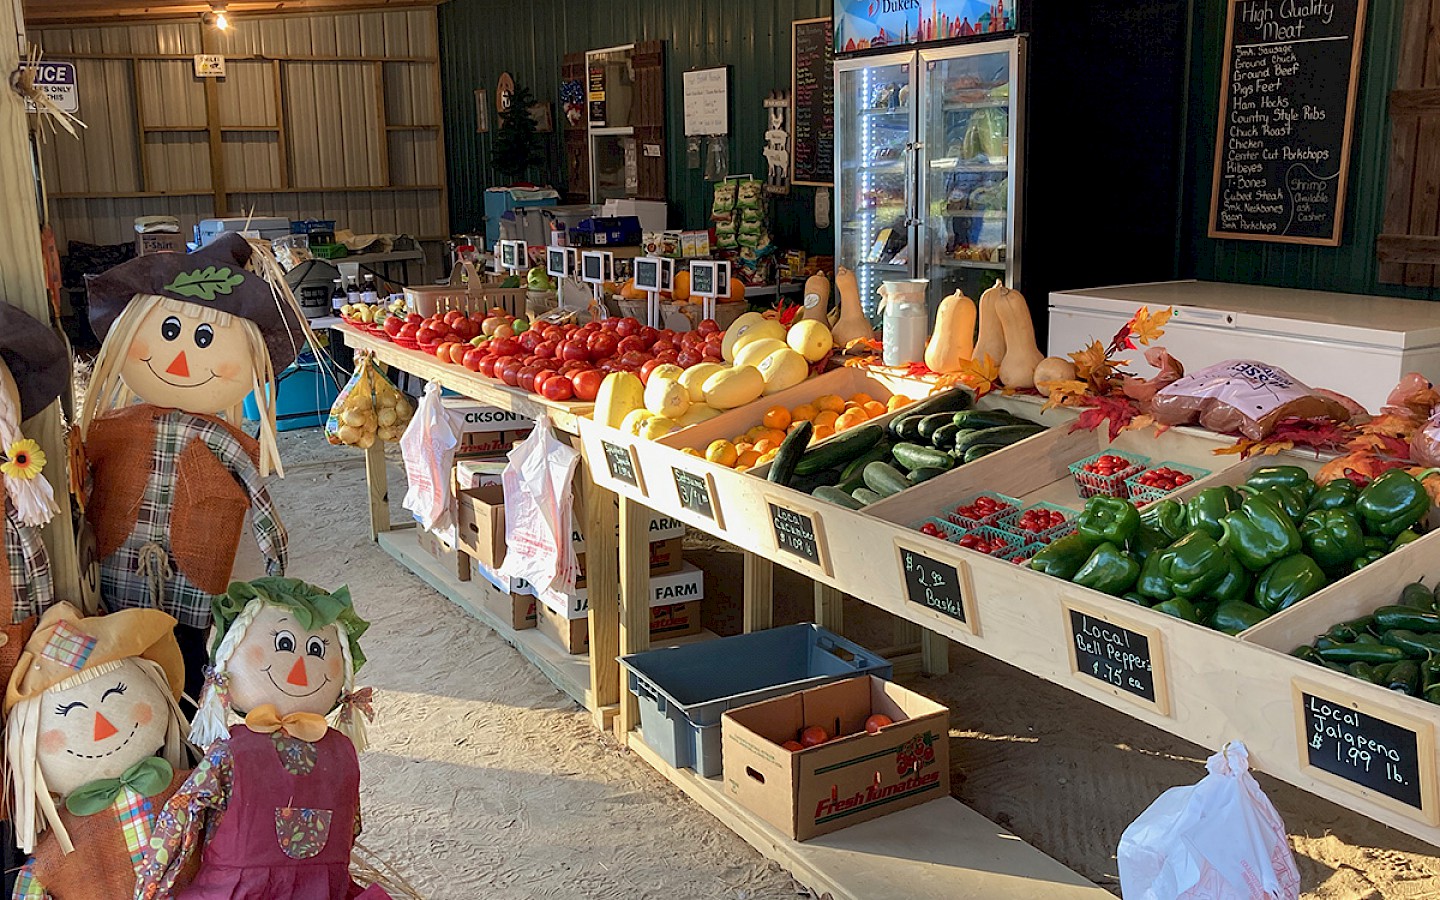 bell peppers, potatoes, squash, tomatoes, and an assortment of items on a long wooden display rack